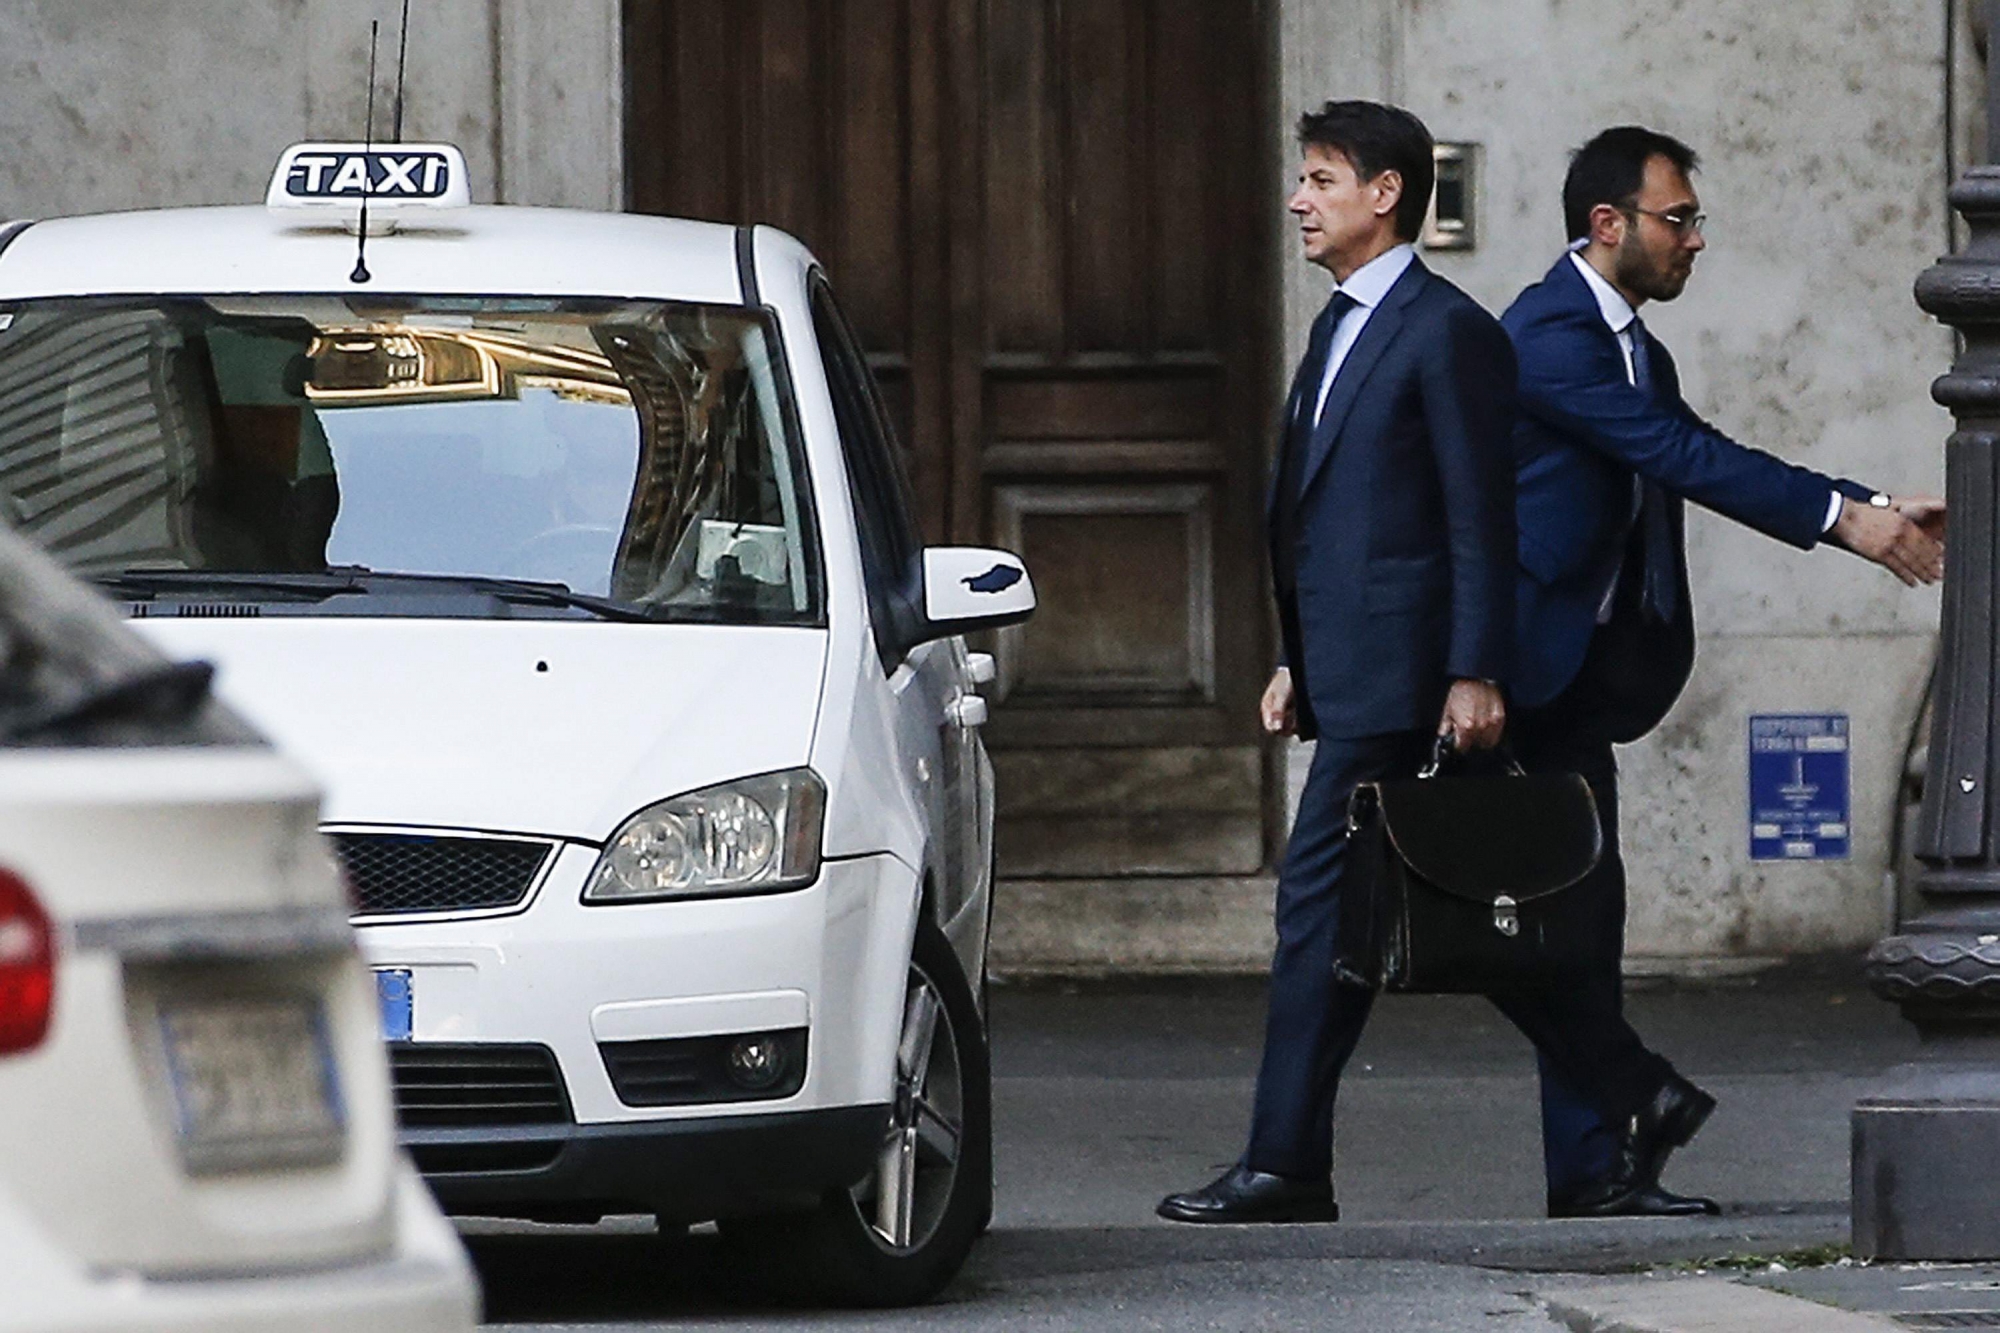 epa06765386 Italian Premier designate Giuseppe Conte leaves the Lower House in Rome, Italy, 26 May 2018. Conte was given the mandate to become Prime Minister on 25 March by President Mattarella, to head the coalition of the two populist parties 5-Star Movement (M5S) and right-wing League (Lega). General elections in Italy were held on 04 March 2018.  EPA/FABIO FRUSTACI ITALY ITALY GOVERNMENT COALITION PARTIES